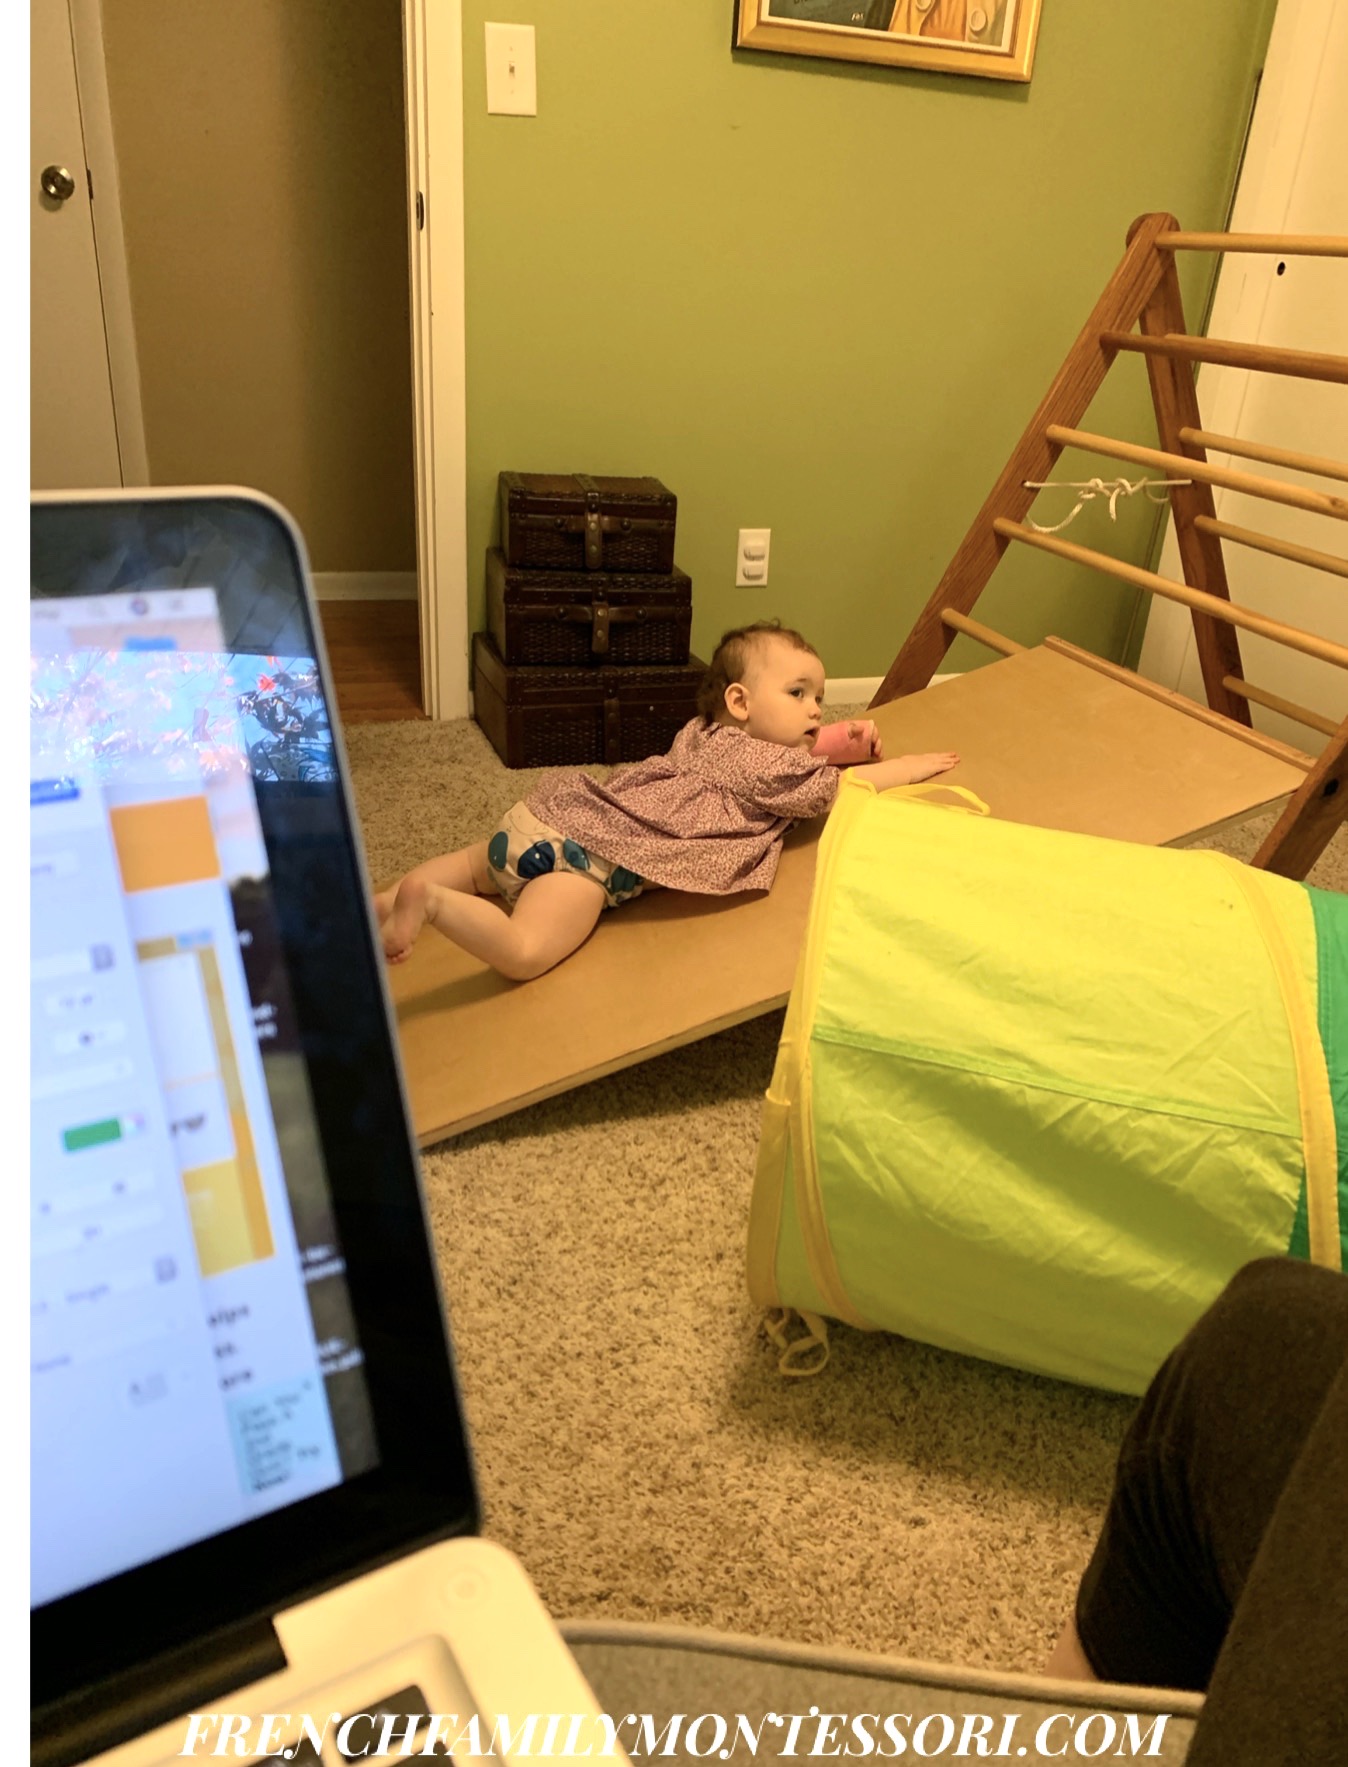 FOLLOWING THE CHILD’S LEAD: THE MOVEMENT ROOM – French Family Montessori